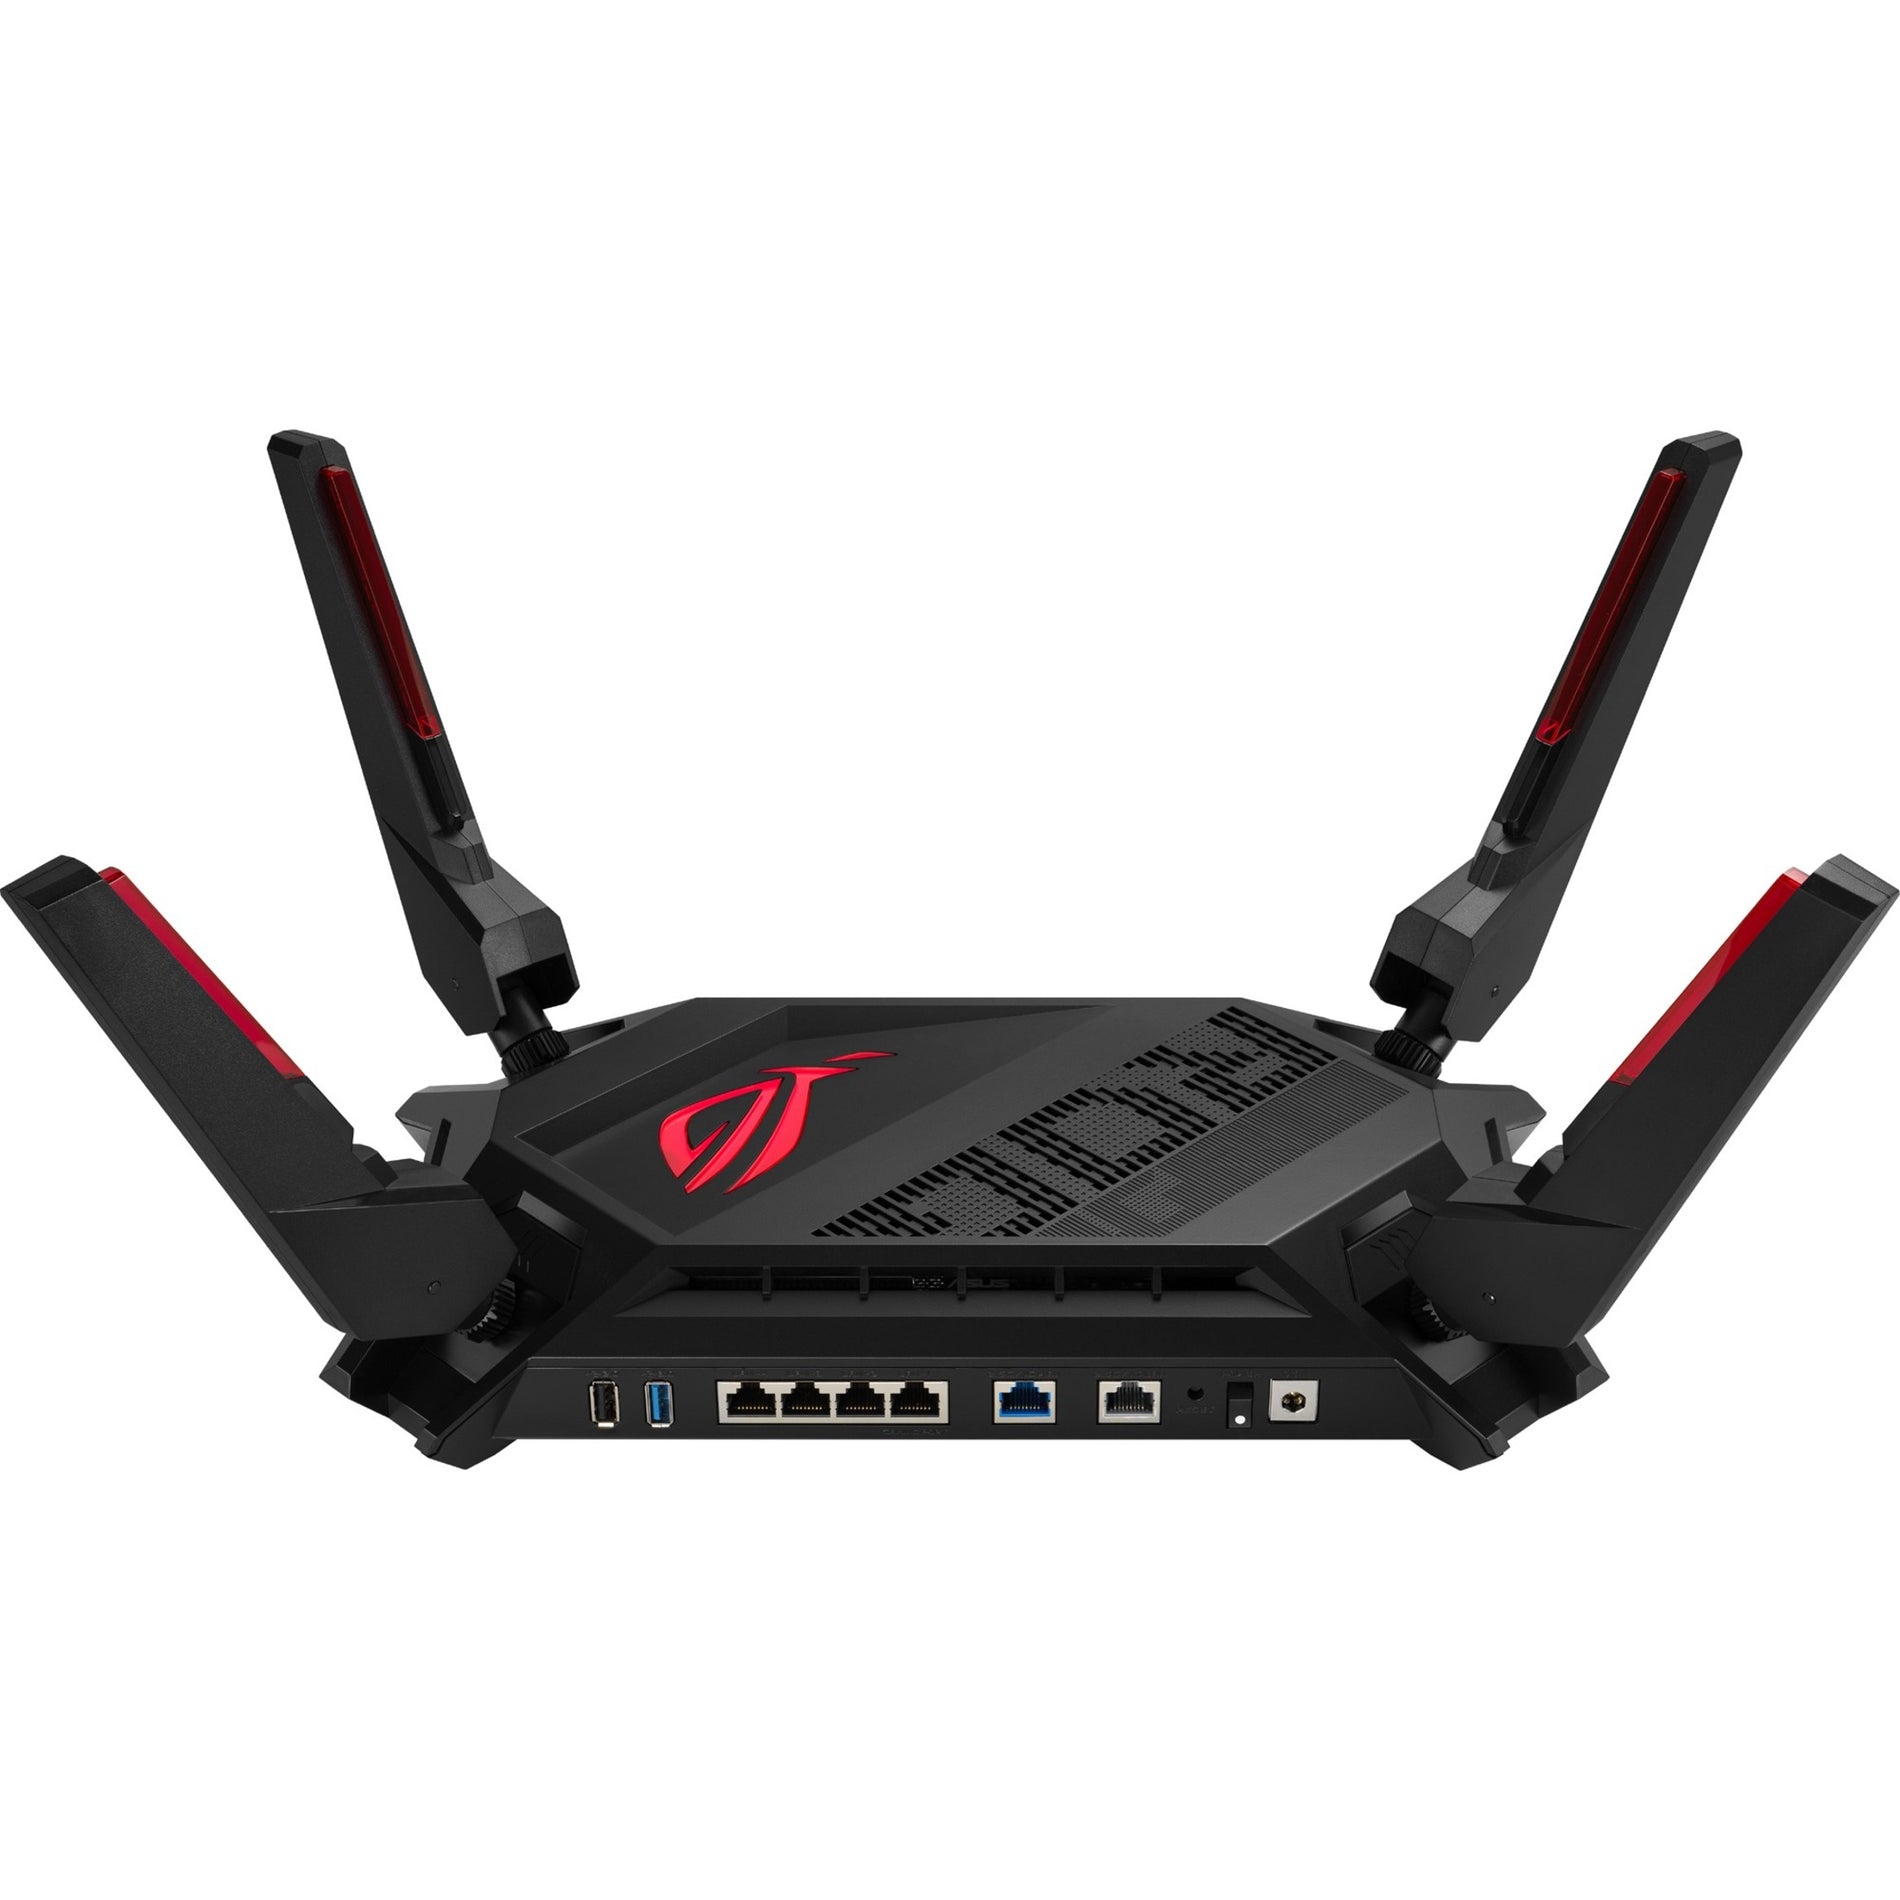 Asus ROG GT-AX6000 Rapture Wireless Router Wi-Fi 6 2.5 Gigabit Ethernet 744 MB/s